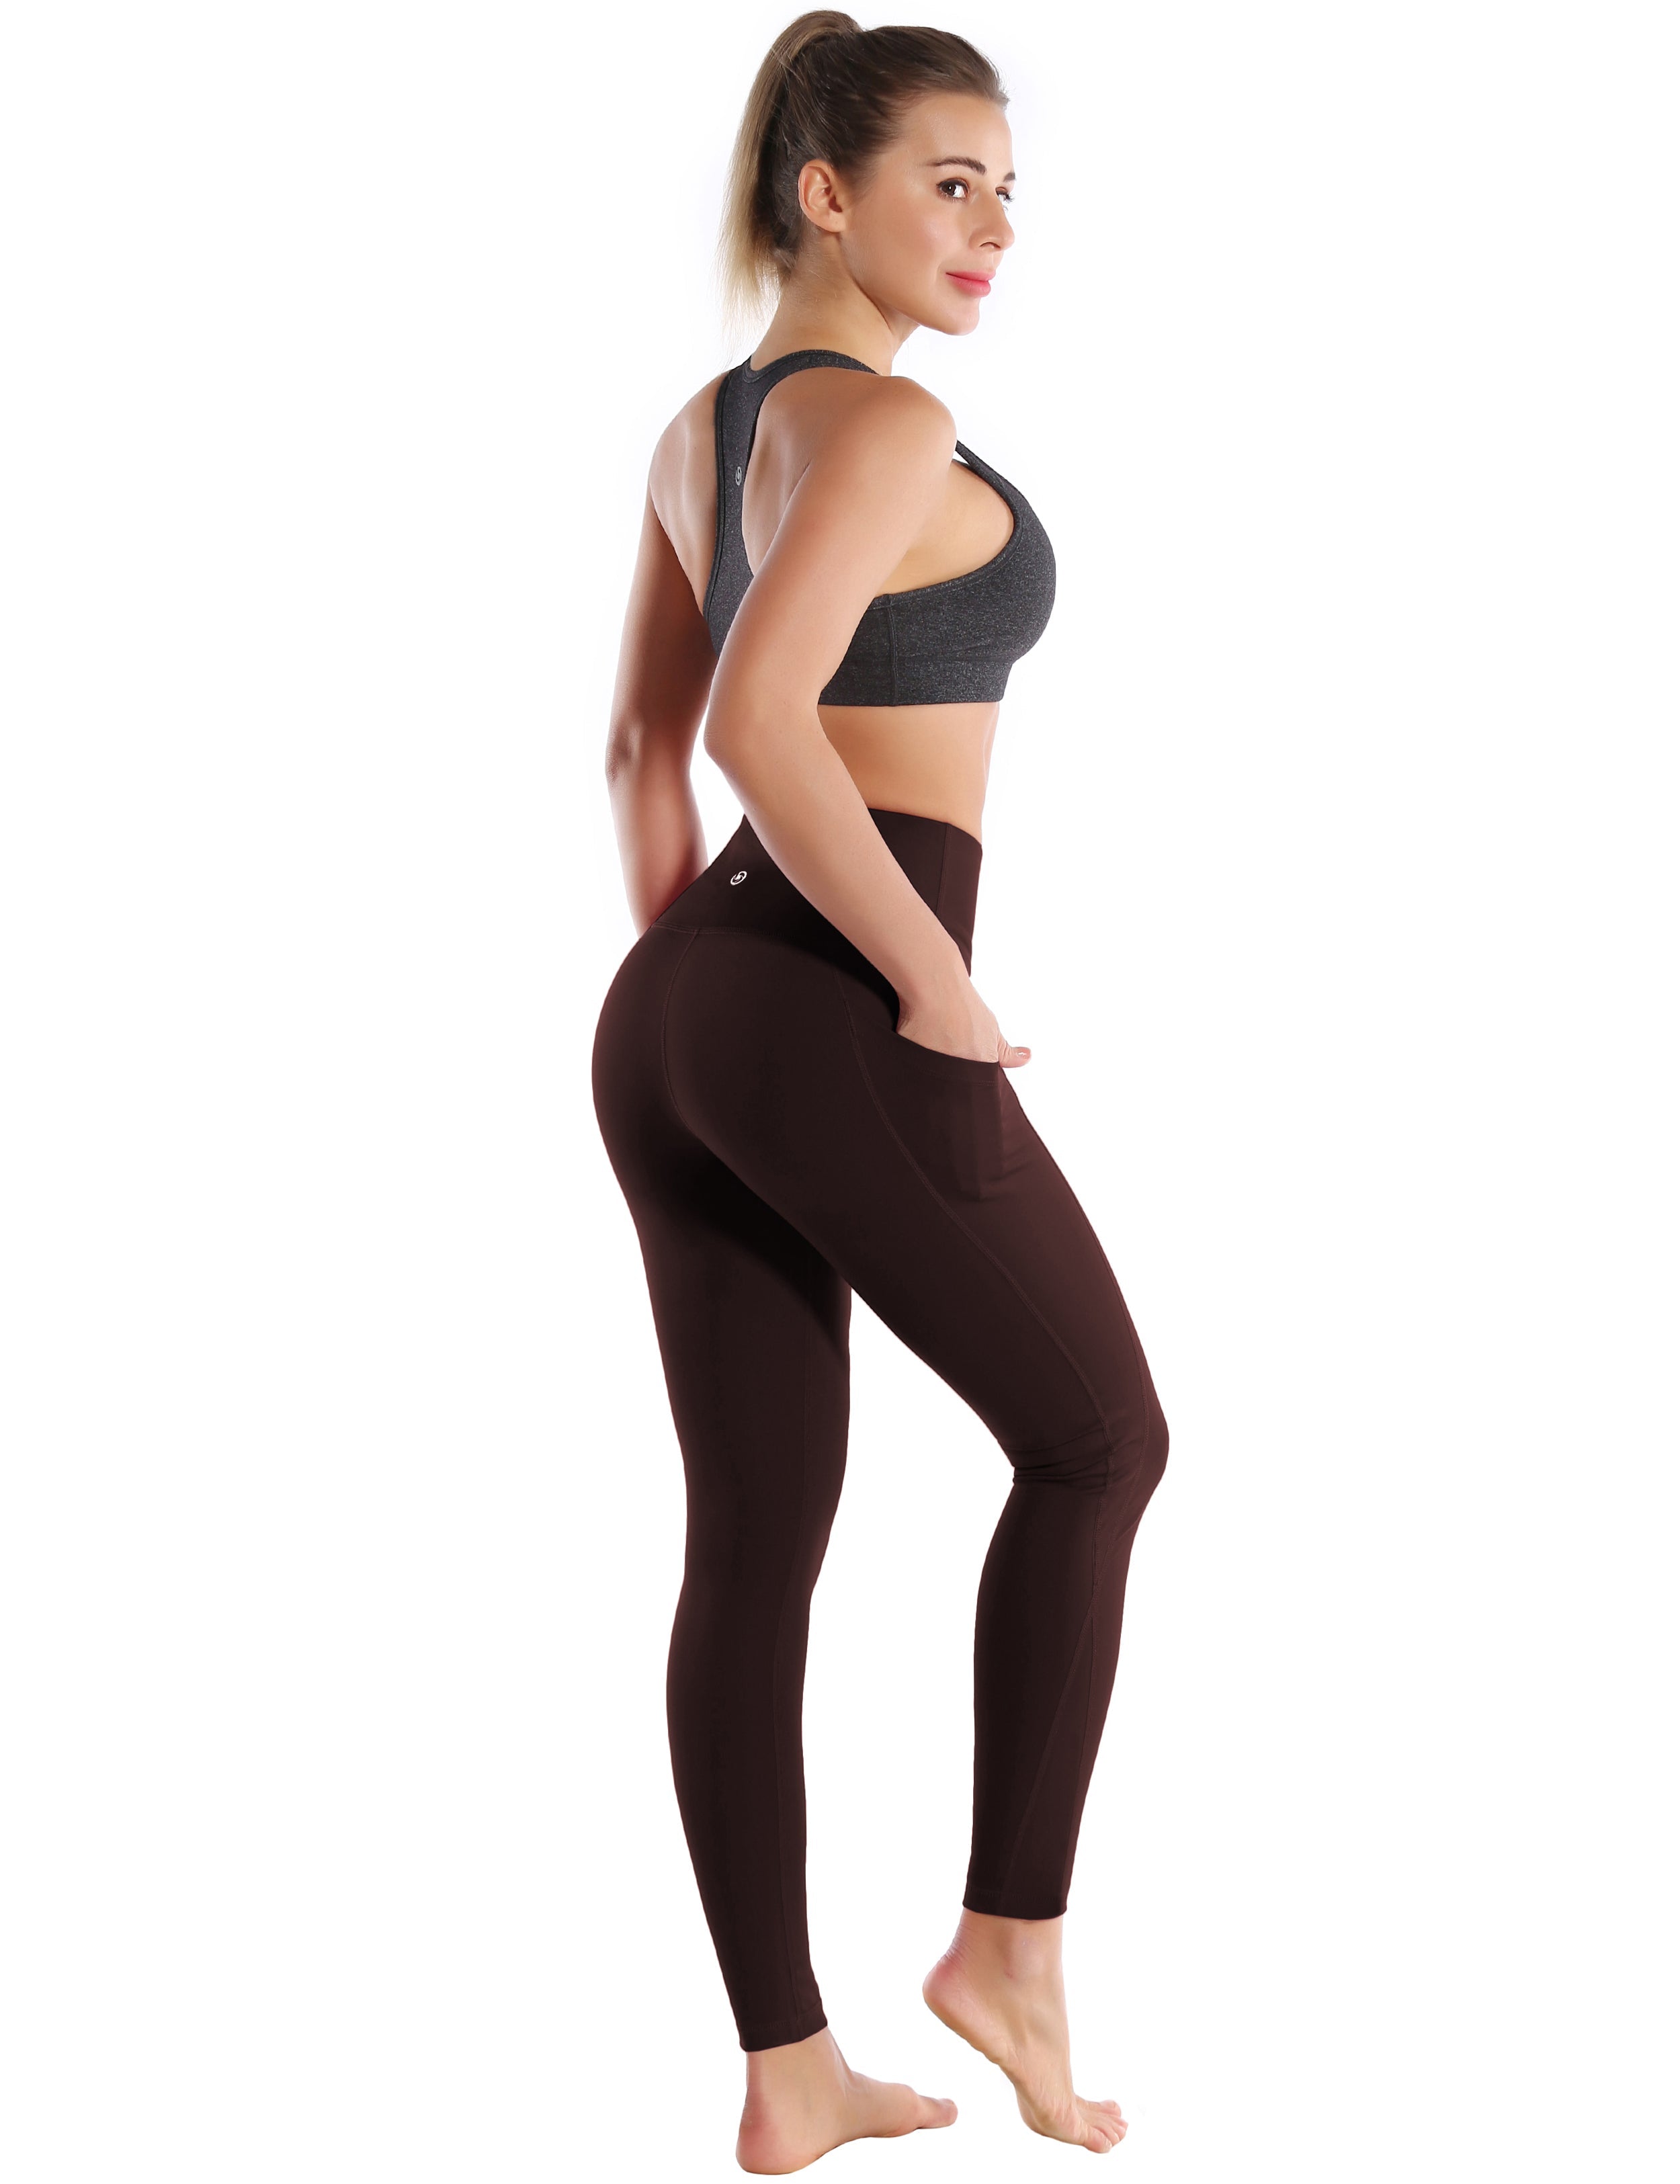 High Waist Side Pockets Pilates Pants mahoganymaroon 75% Nylon, 25% Spandex Fabric doesn't attract lint easily 4-way stretch No see-through Moisture-wicking Tummy control Inner pocket